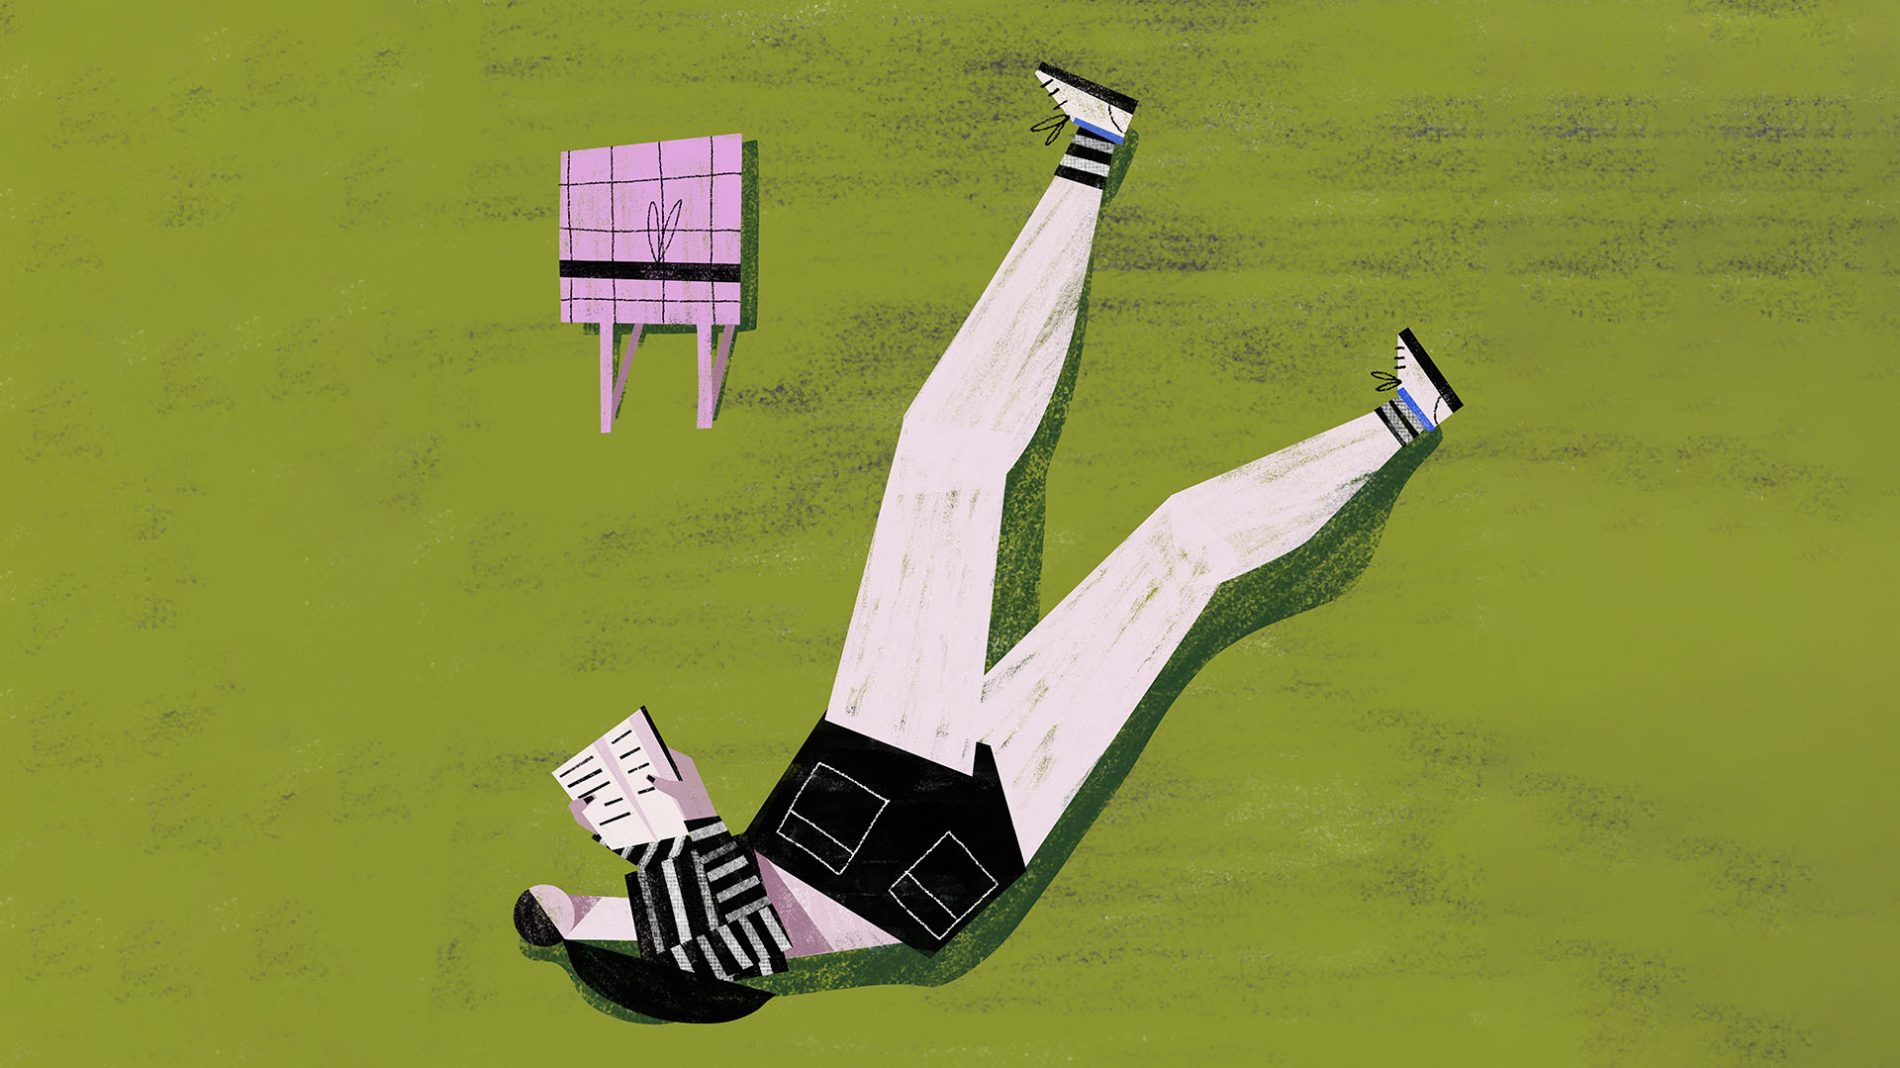 Illustration of a person lying on the grass reading a book - living with self-harm scars